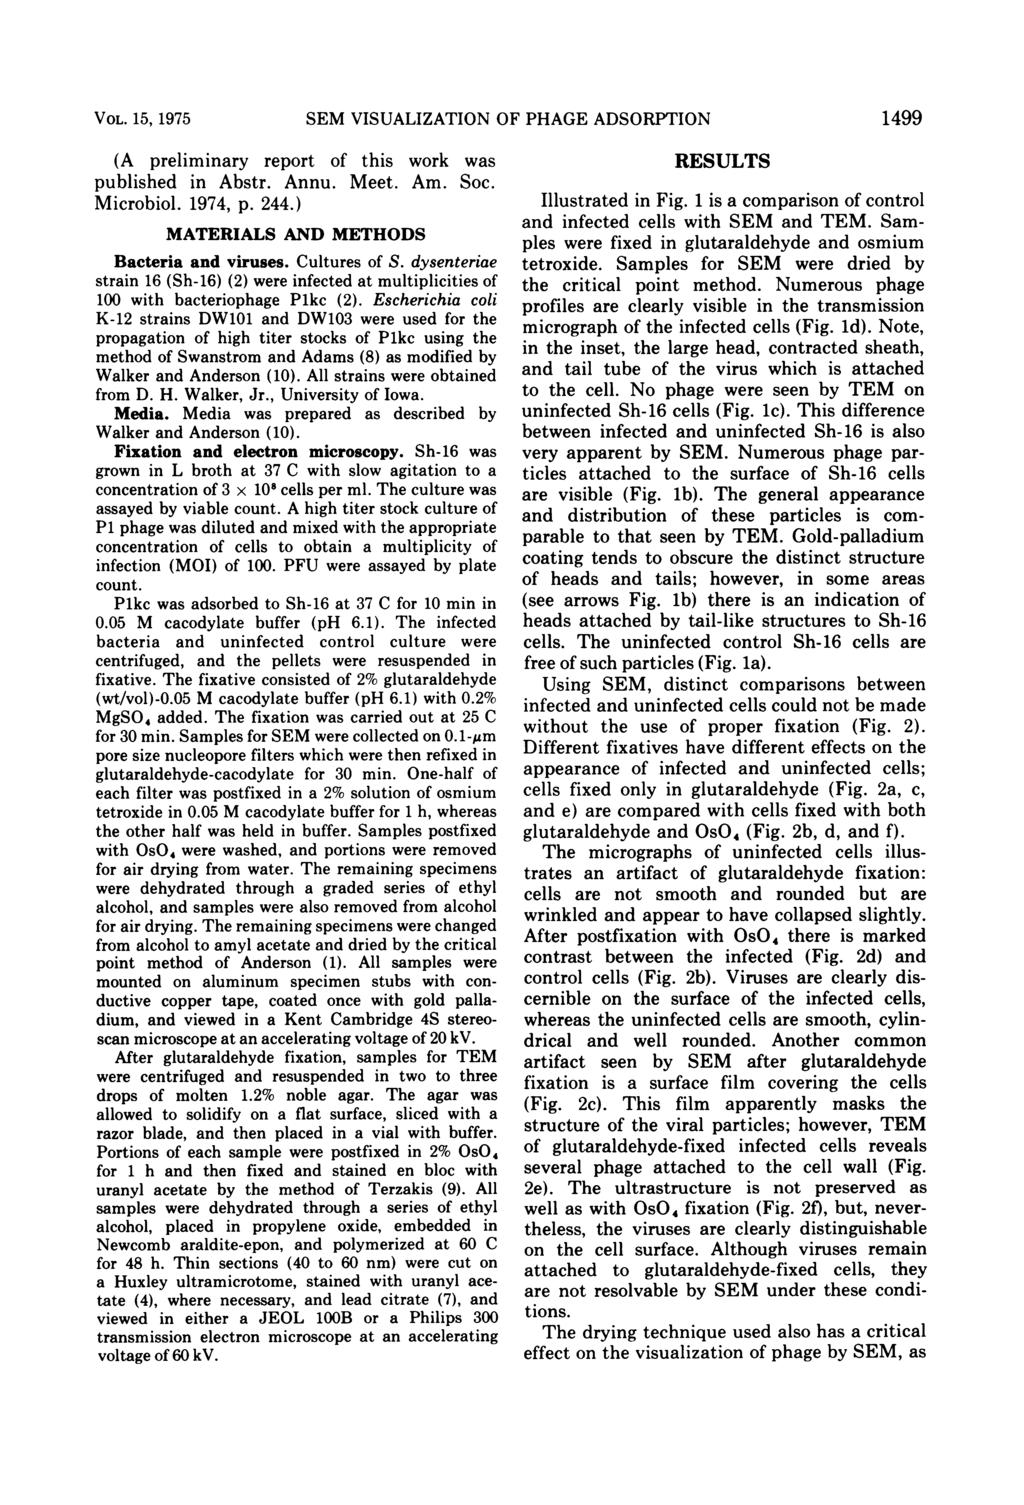 VOL. 15, 1975 SEM VISUALIZATION OF PHAGE ADSORPTION 1499 (A preliminary report of this work was published in Abstr. Annu. Meet. Am. Soc. Microbiol. 1974, p. 244.